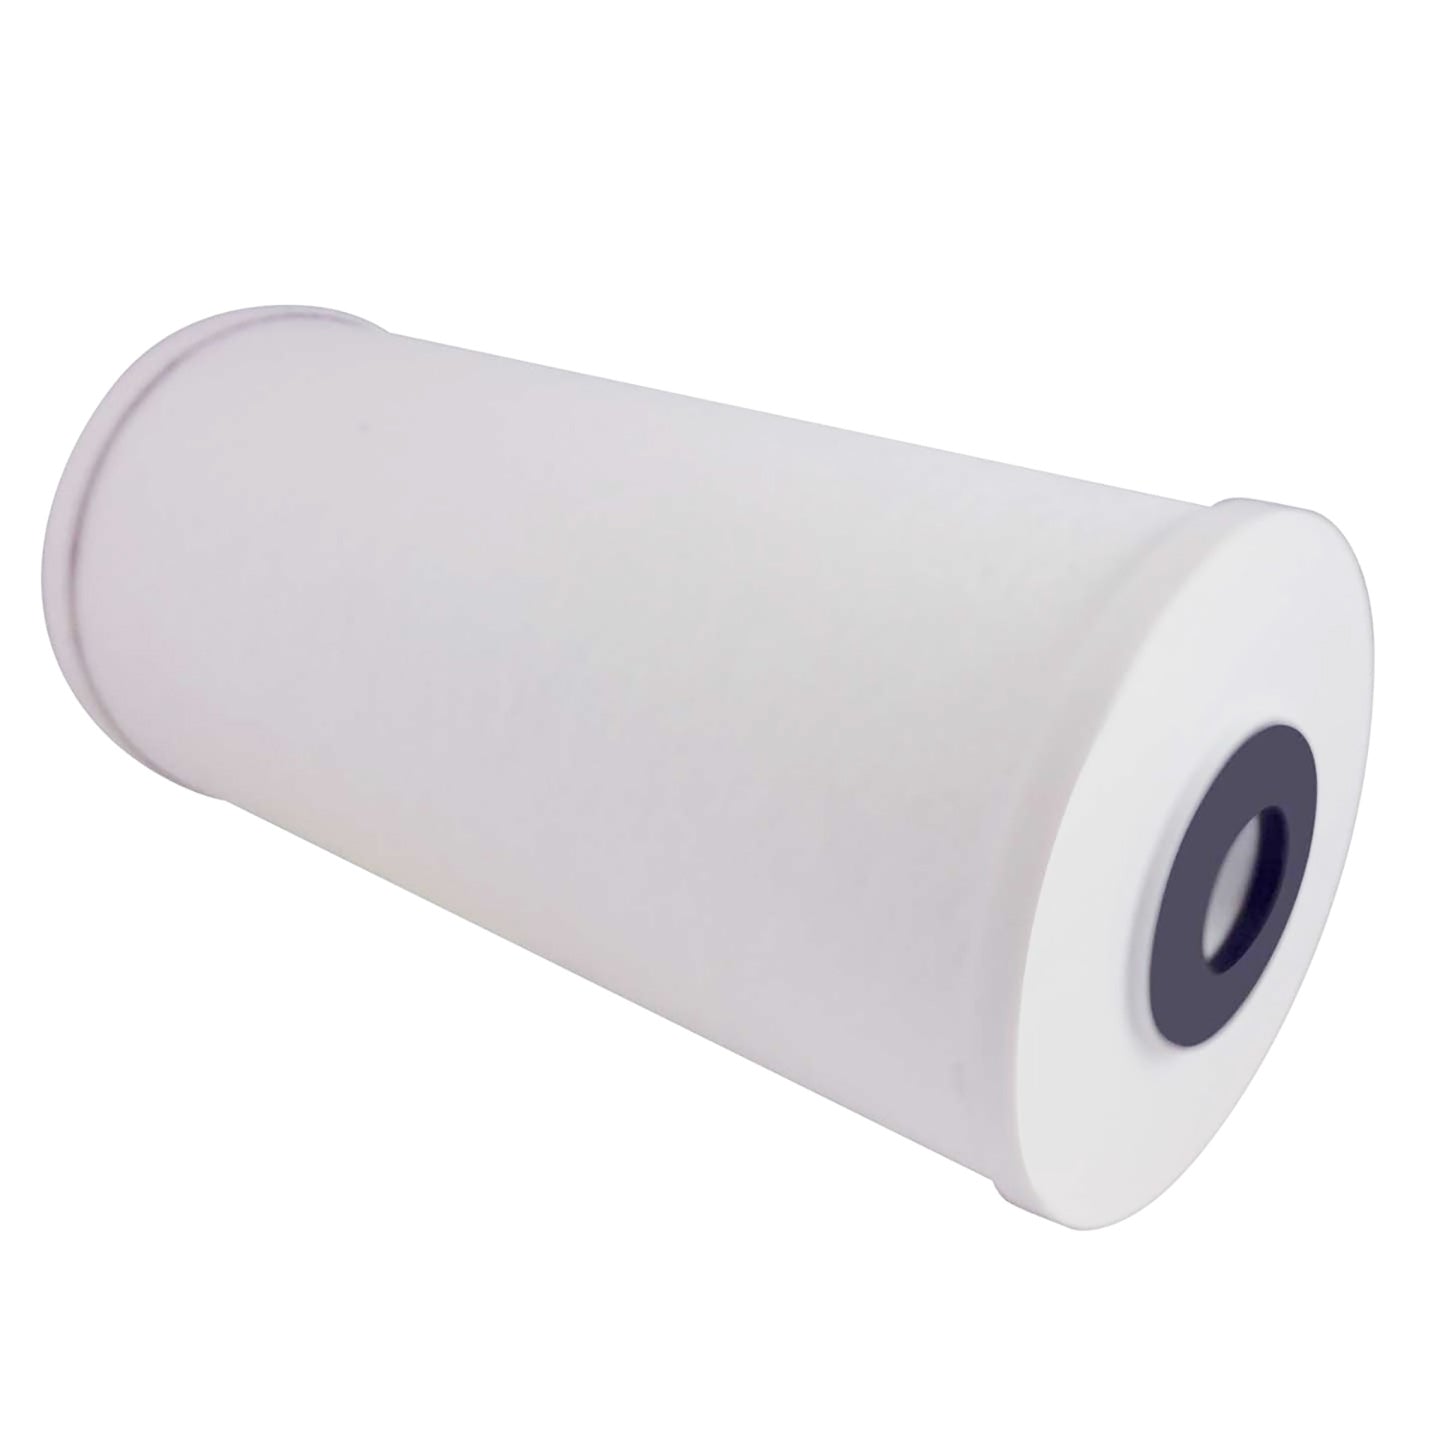 Pentek RFC-BB Whole House Filter Replacement Cartridge (Side View)